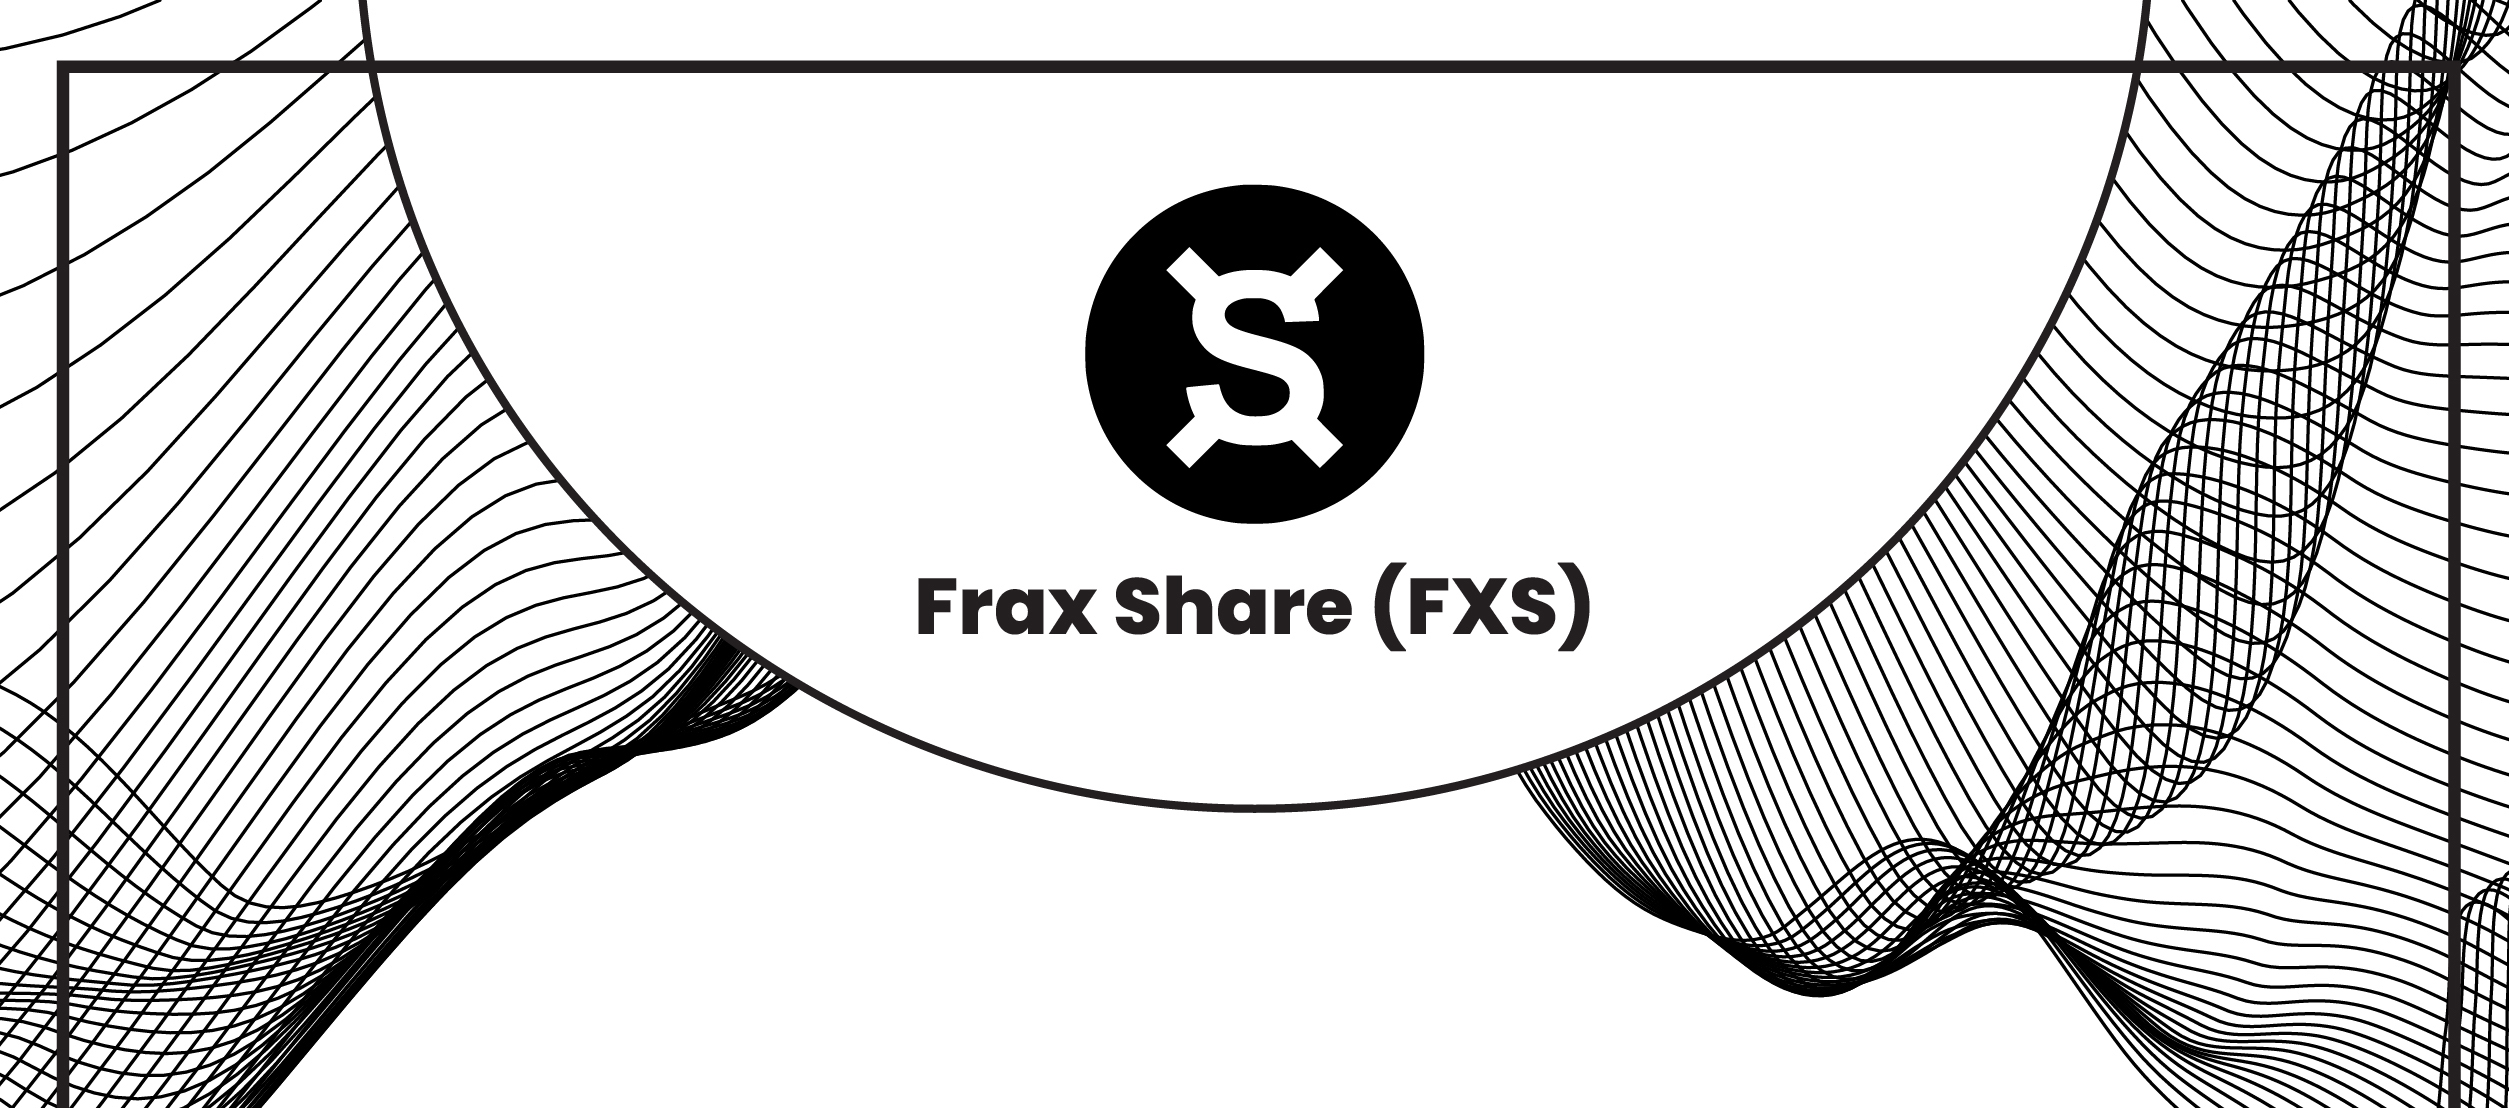 Frax Share (FXS) Crypto Banner - Marketing Material